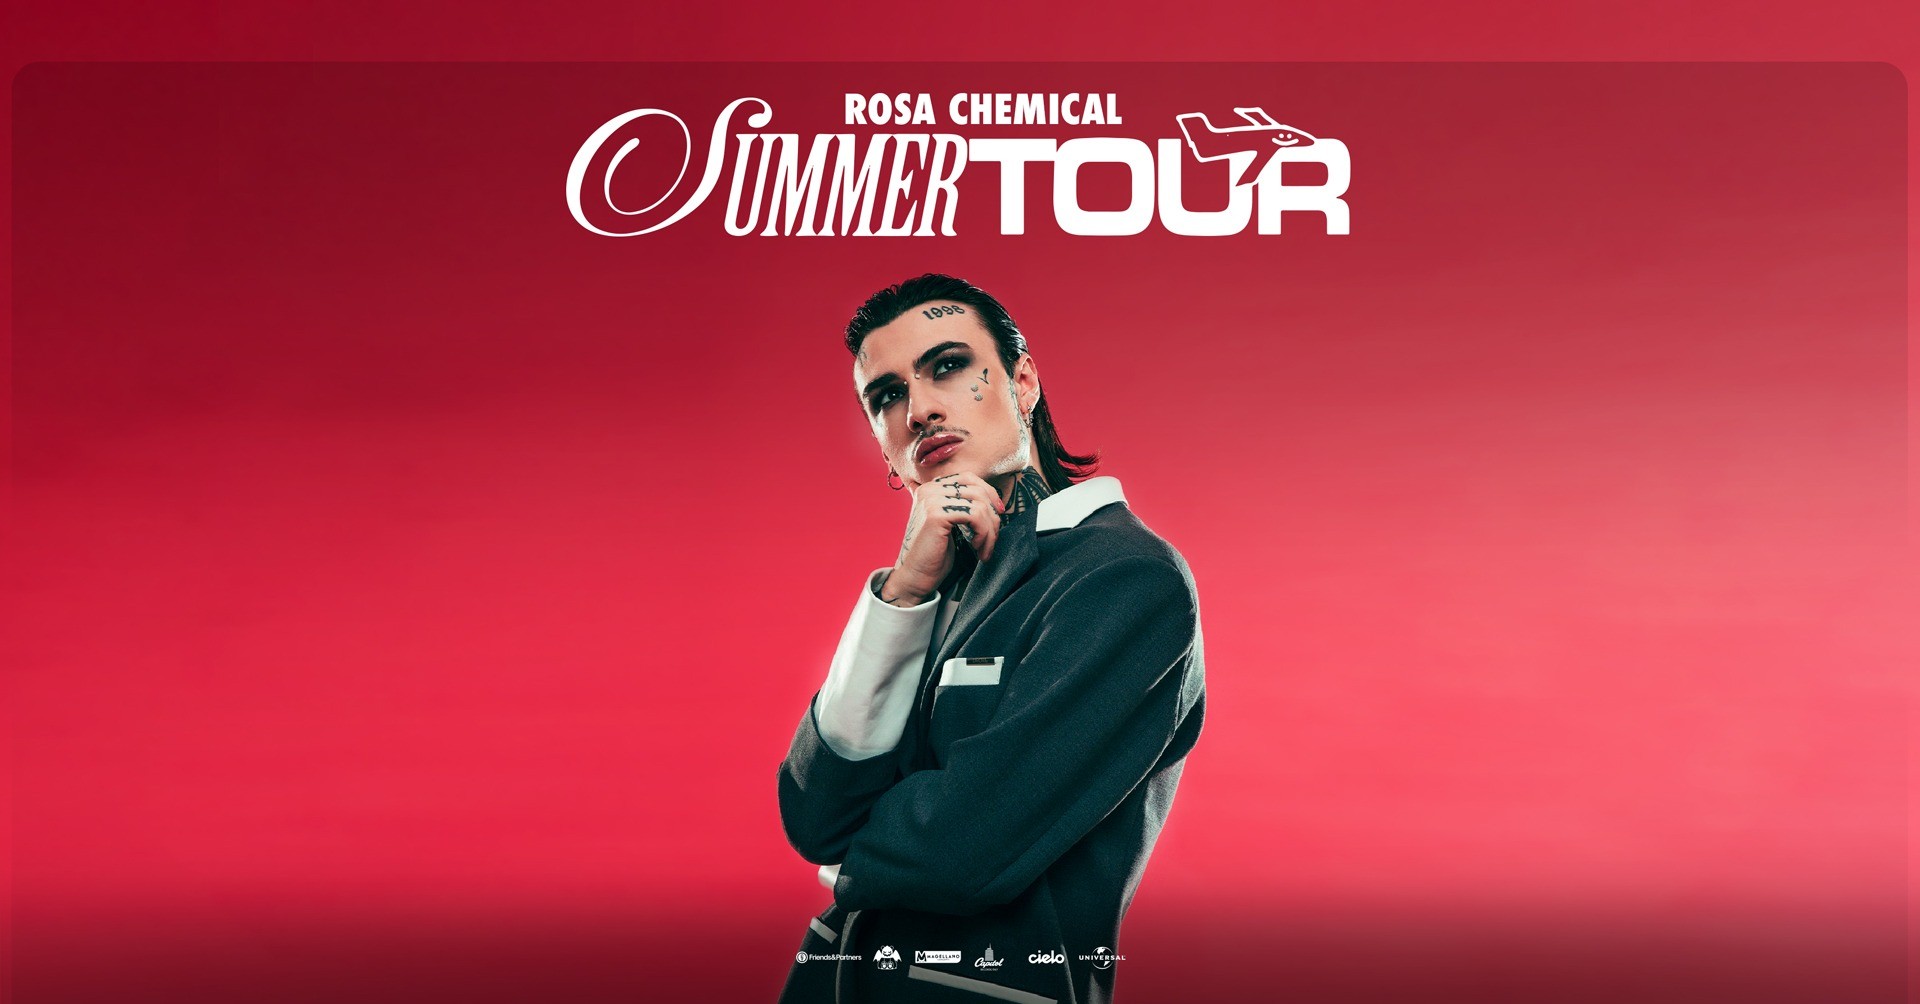 image ROSA CHEMICAL - SUMMER TOUR